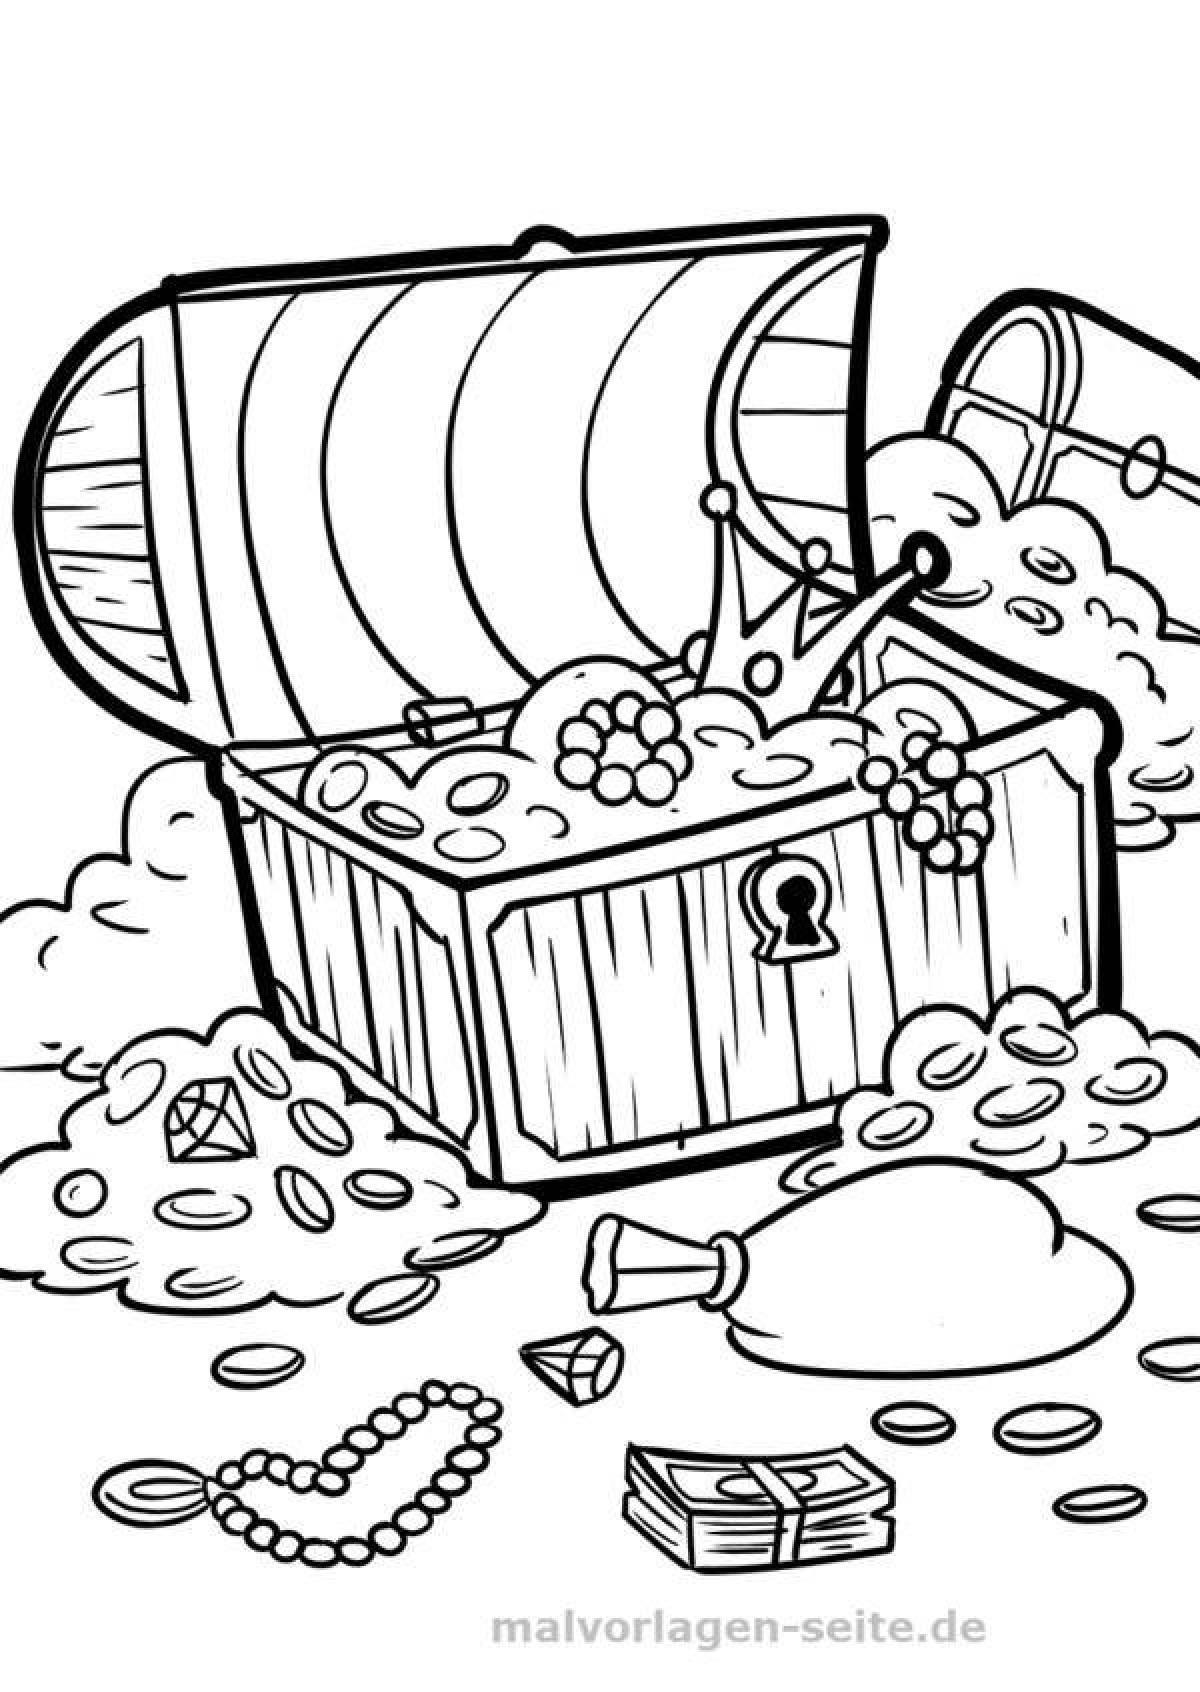 Decorated treasure chest coloring page